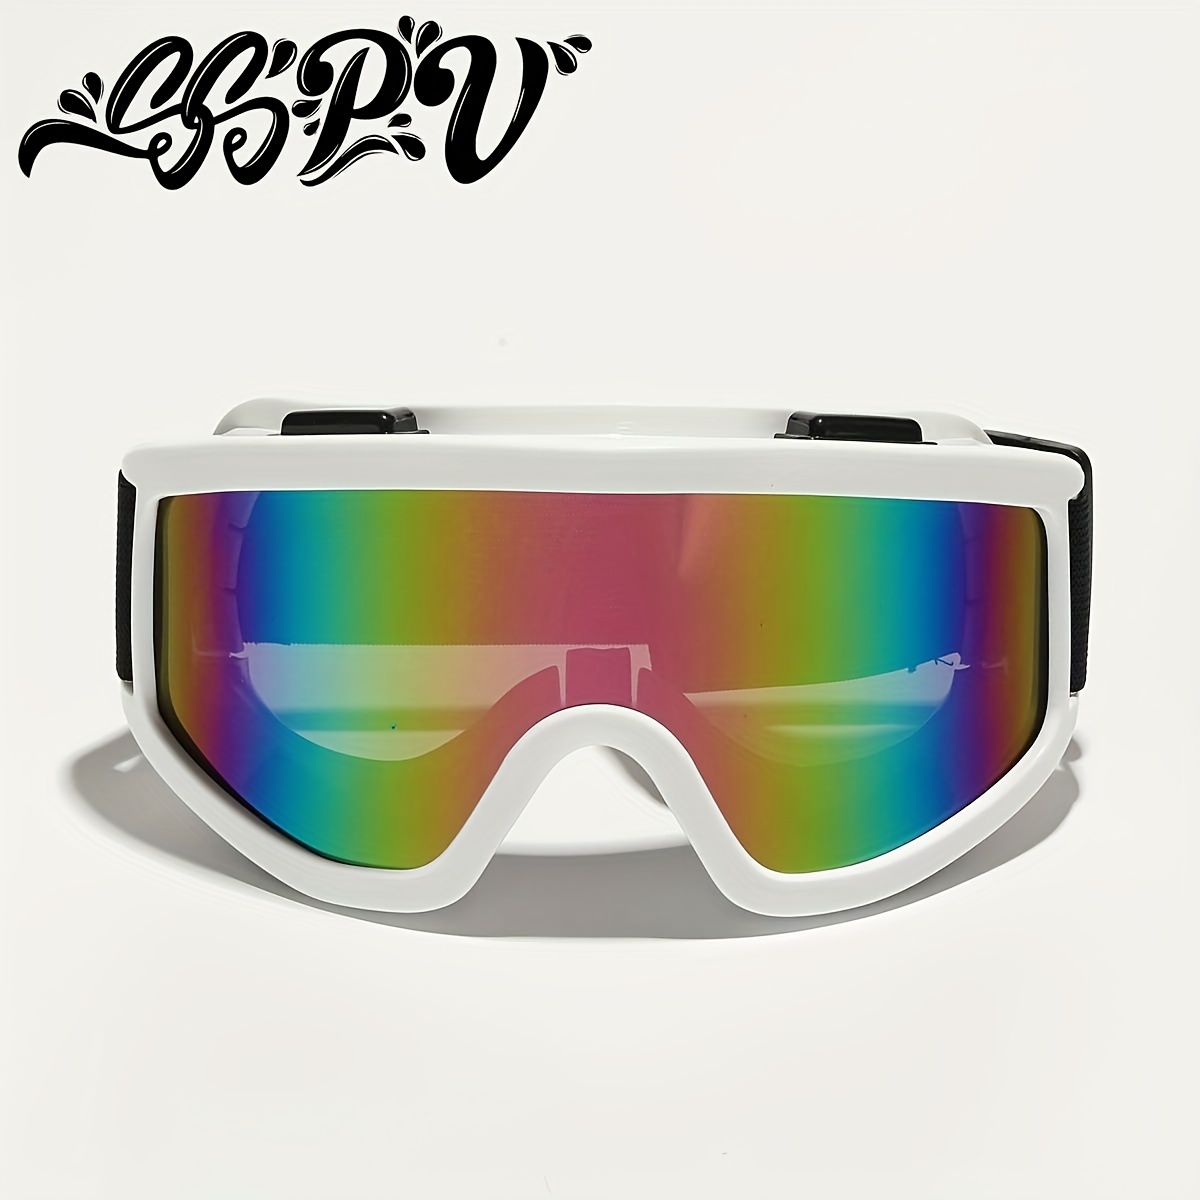 SSPV Ski Goggles with Adjustable Elastic Straps and Impact Resistant Lenses